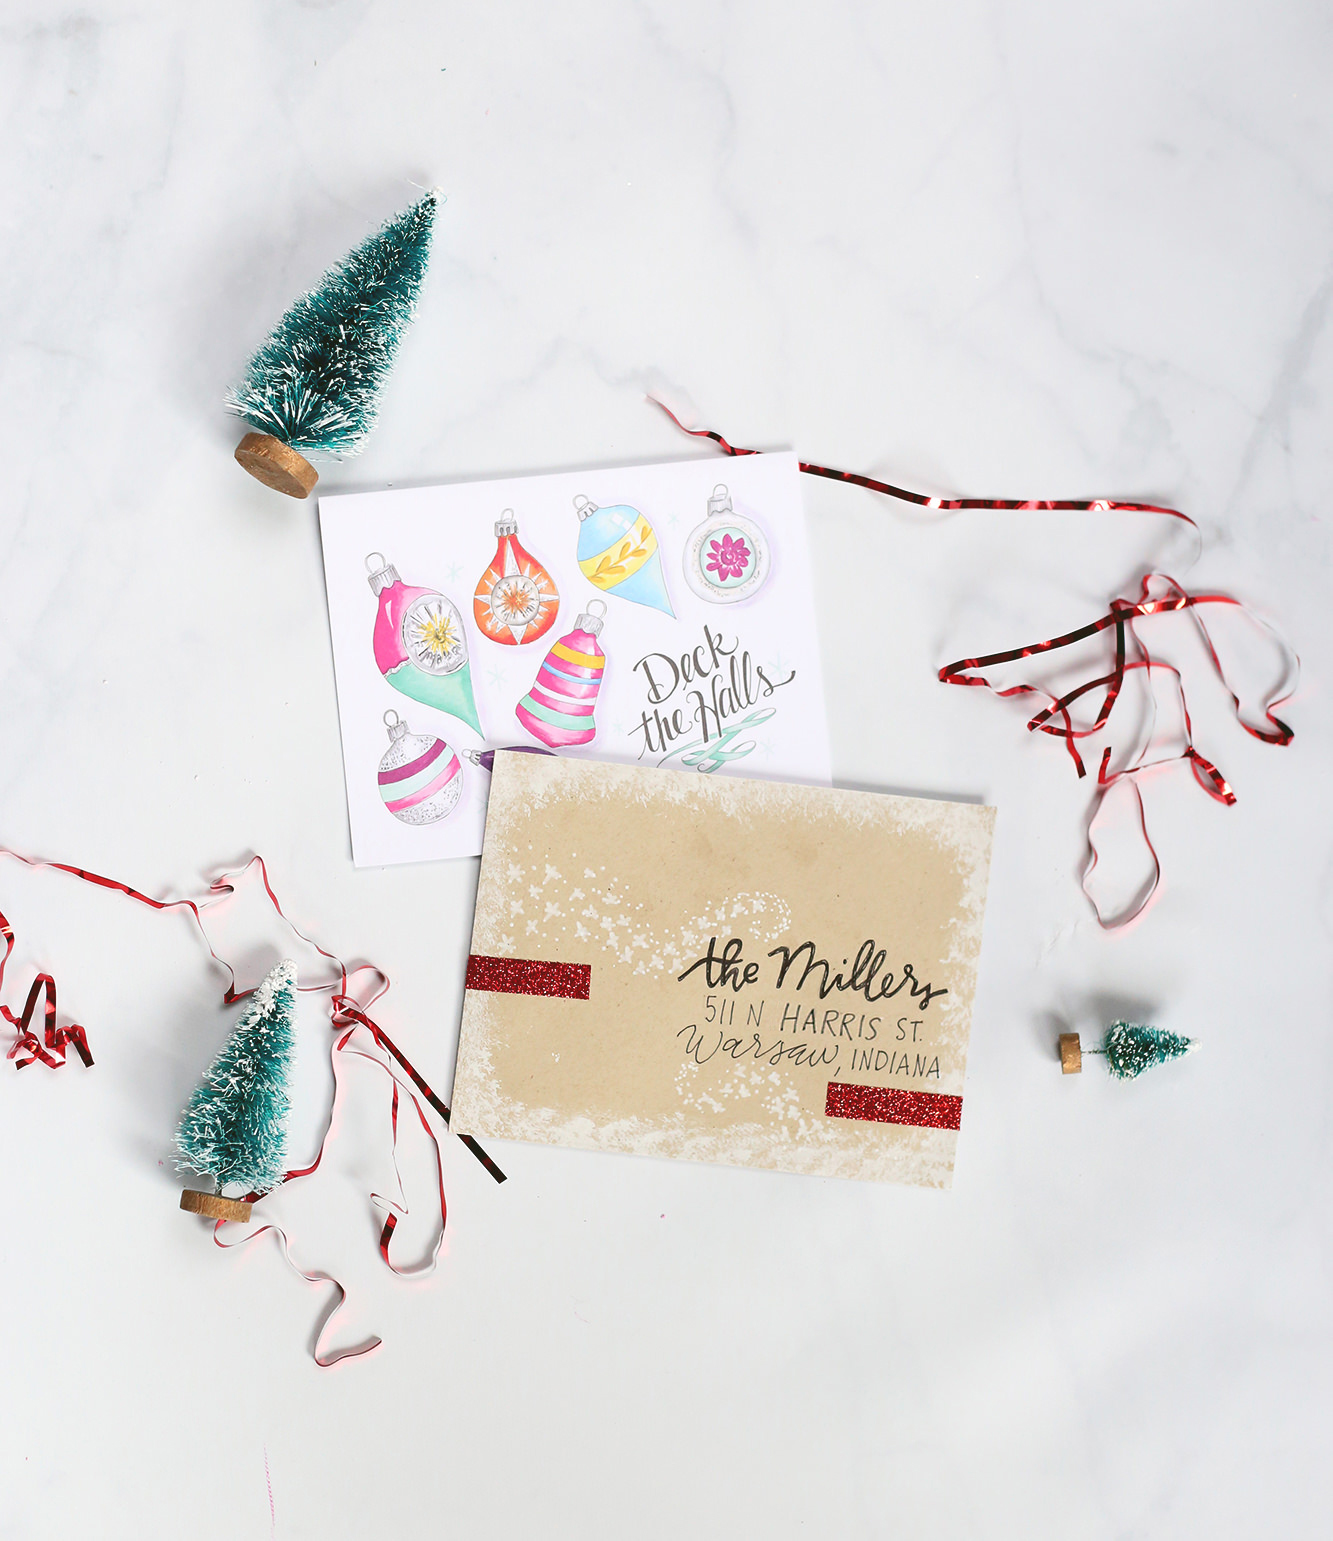 Christmas-inspired envelopes that are perfect for sending holiday wishes!